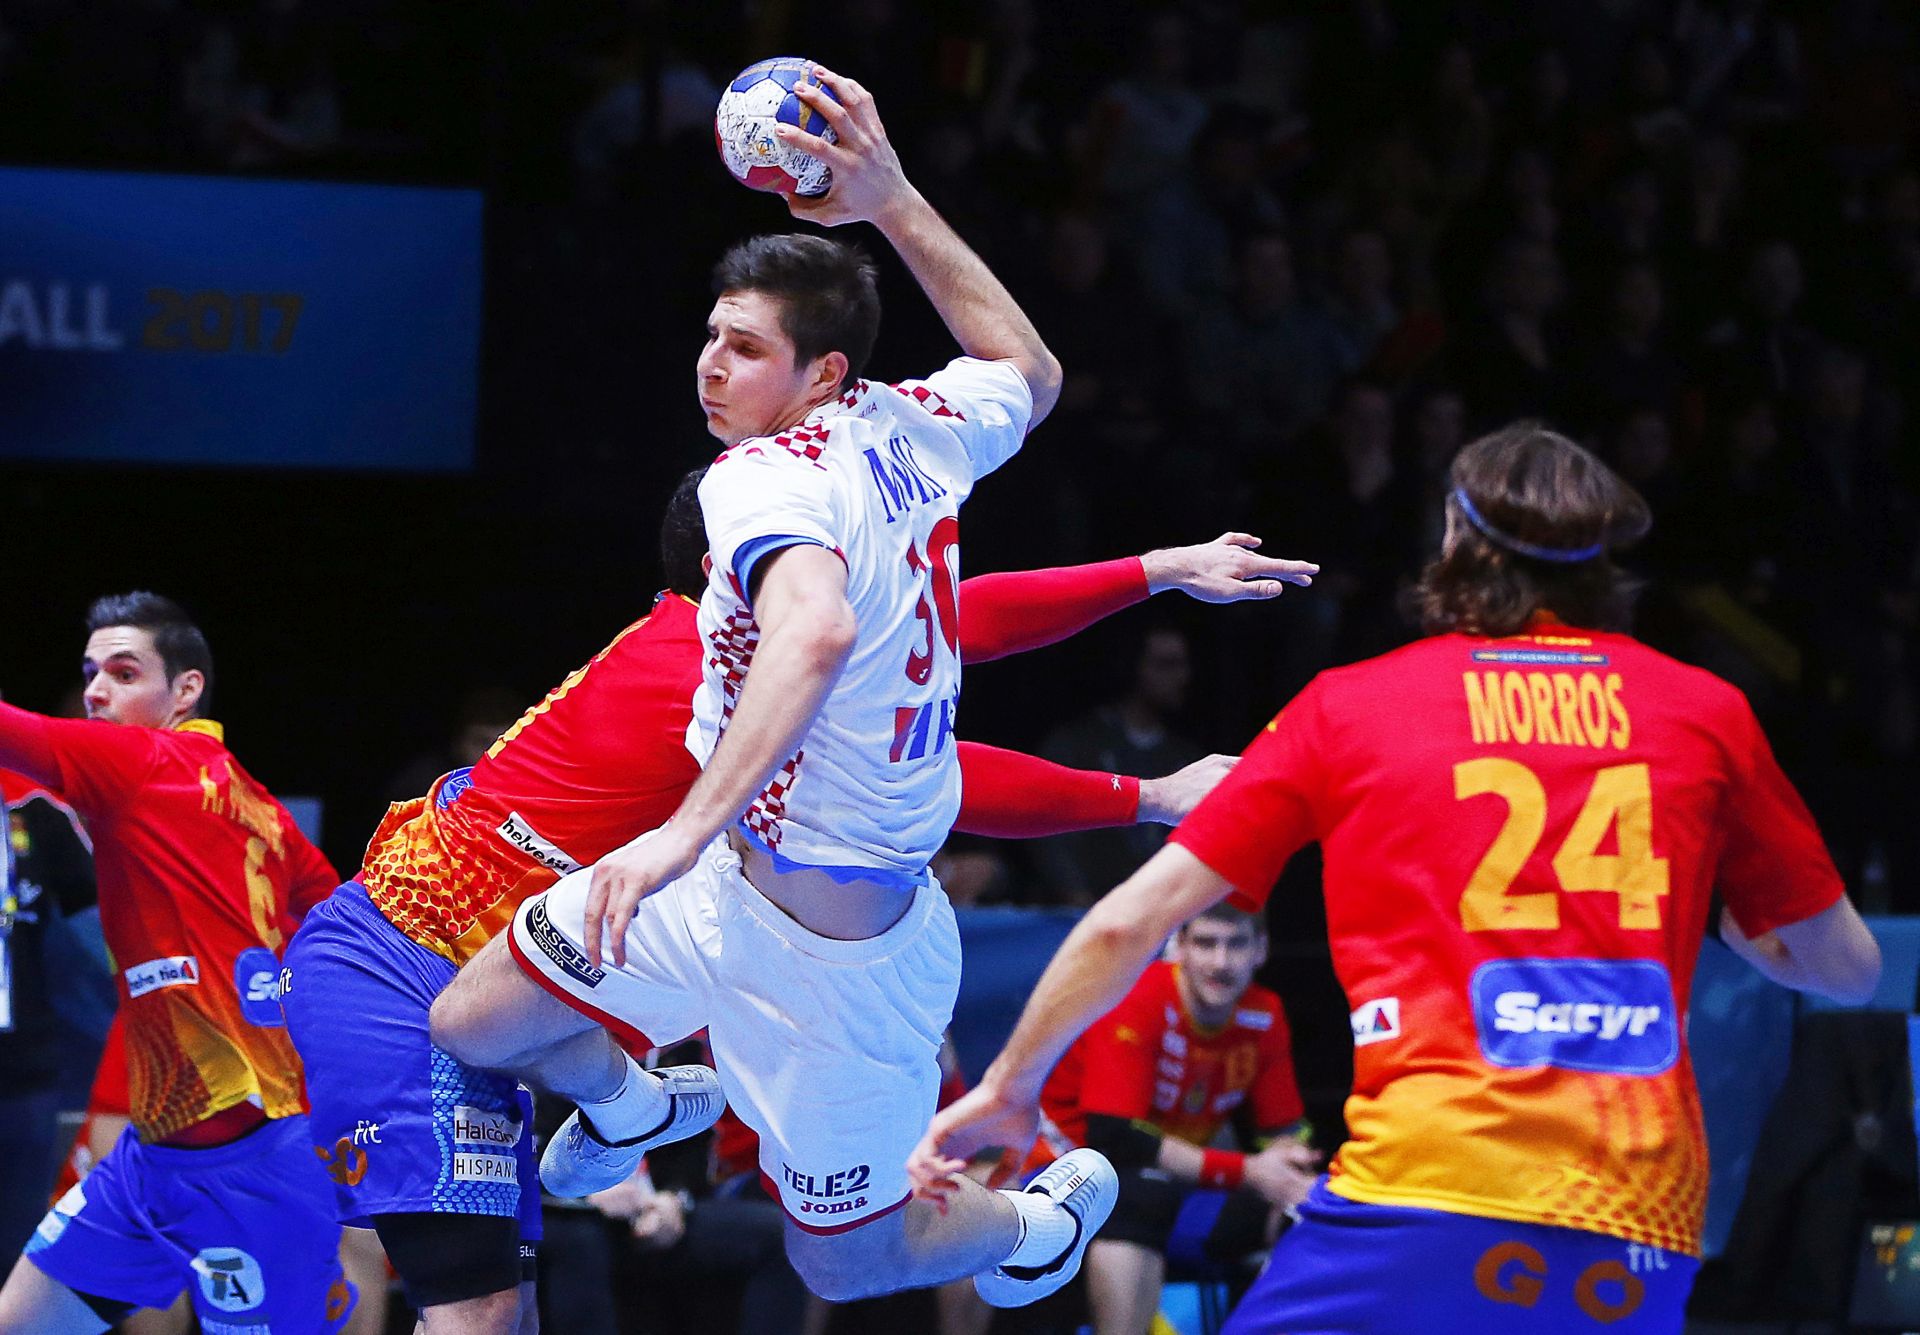 epa05747556 Croatia's Marko Mamic (C) in action against Spanish players Iosu Goni (L) and Viran Morros (R) during the quarter final match between Spain and Croatia at the IHF Men's Handball World Championship in Montpellier, France, 24 January 2017.  EPA/GUILLAUME HORCAJUELO